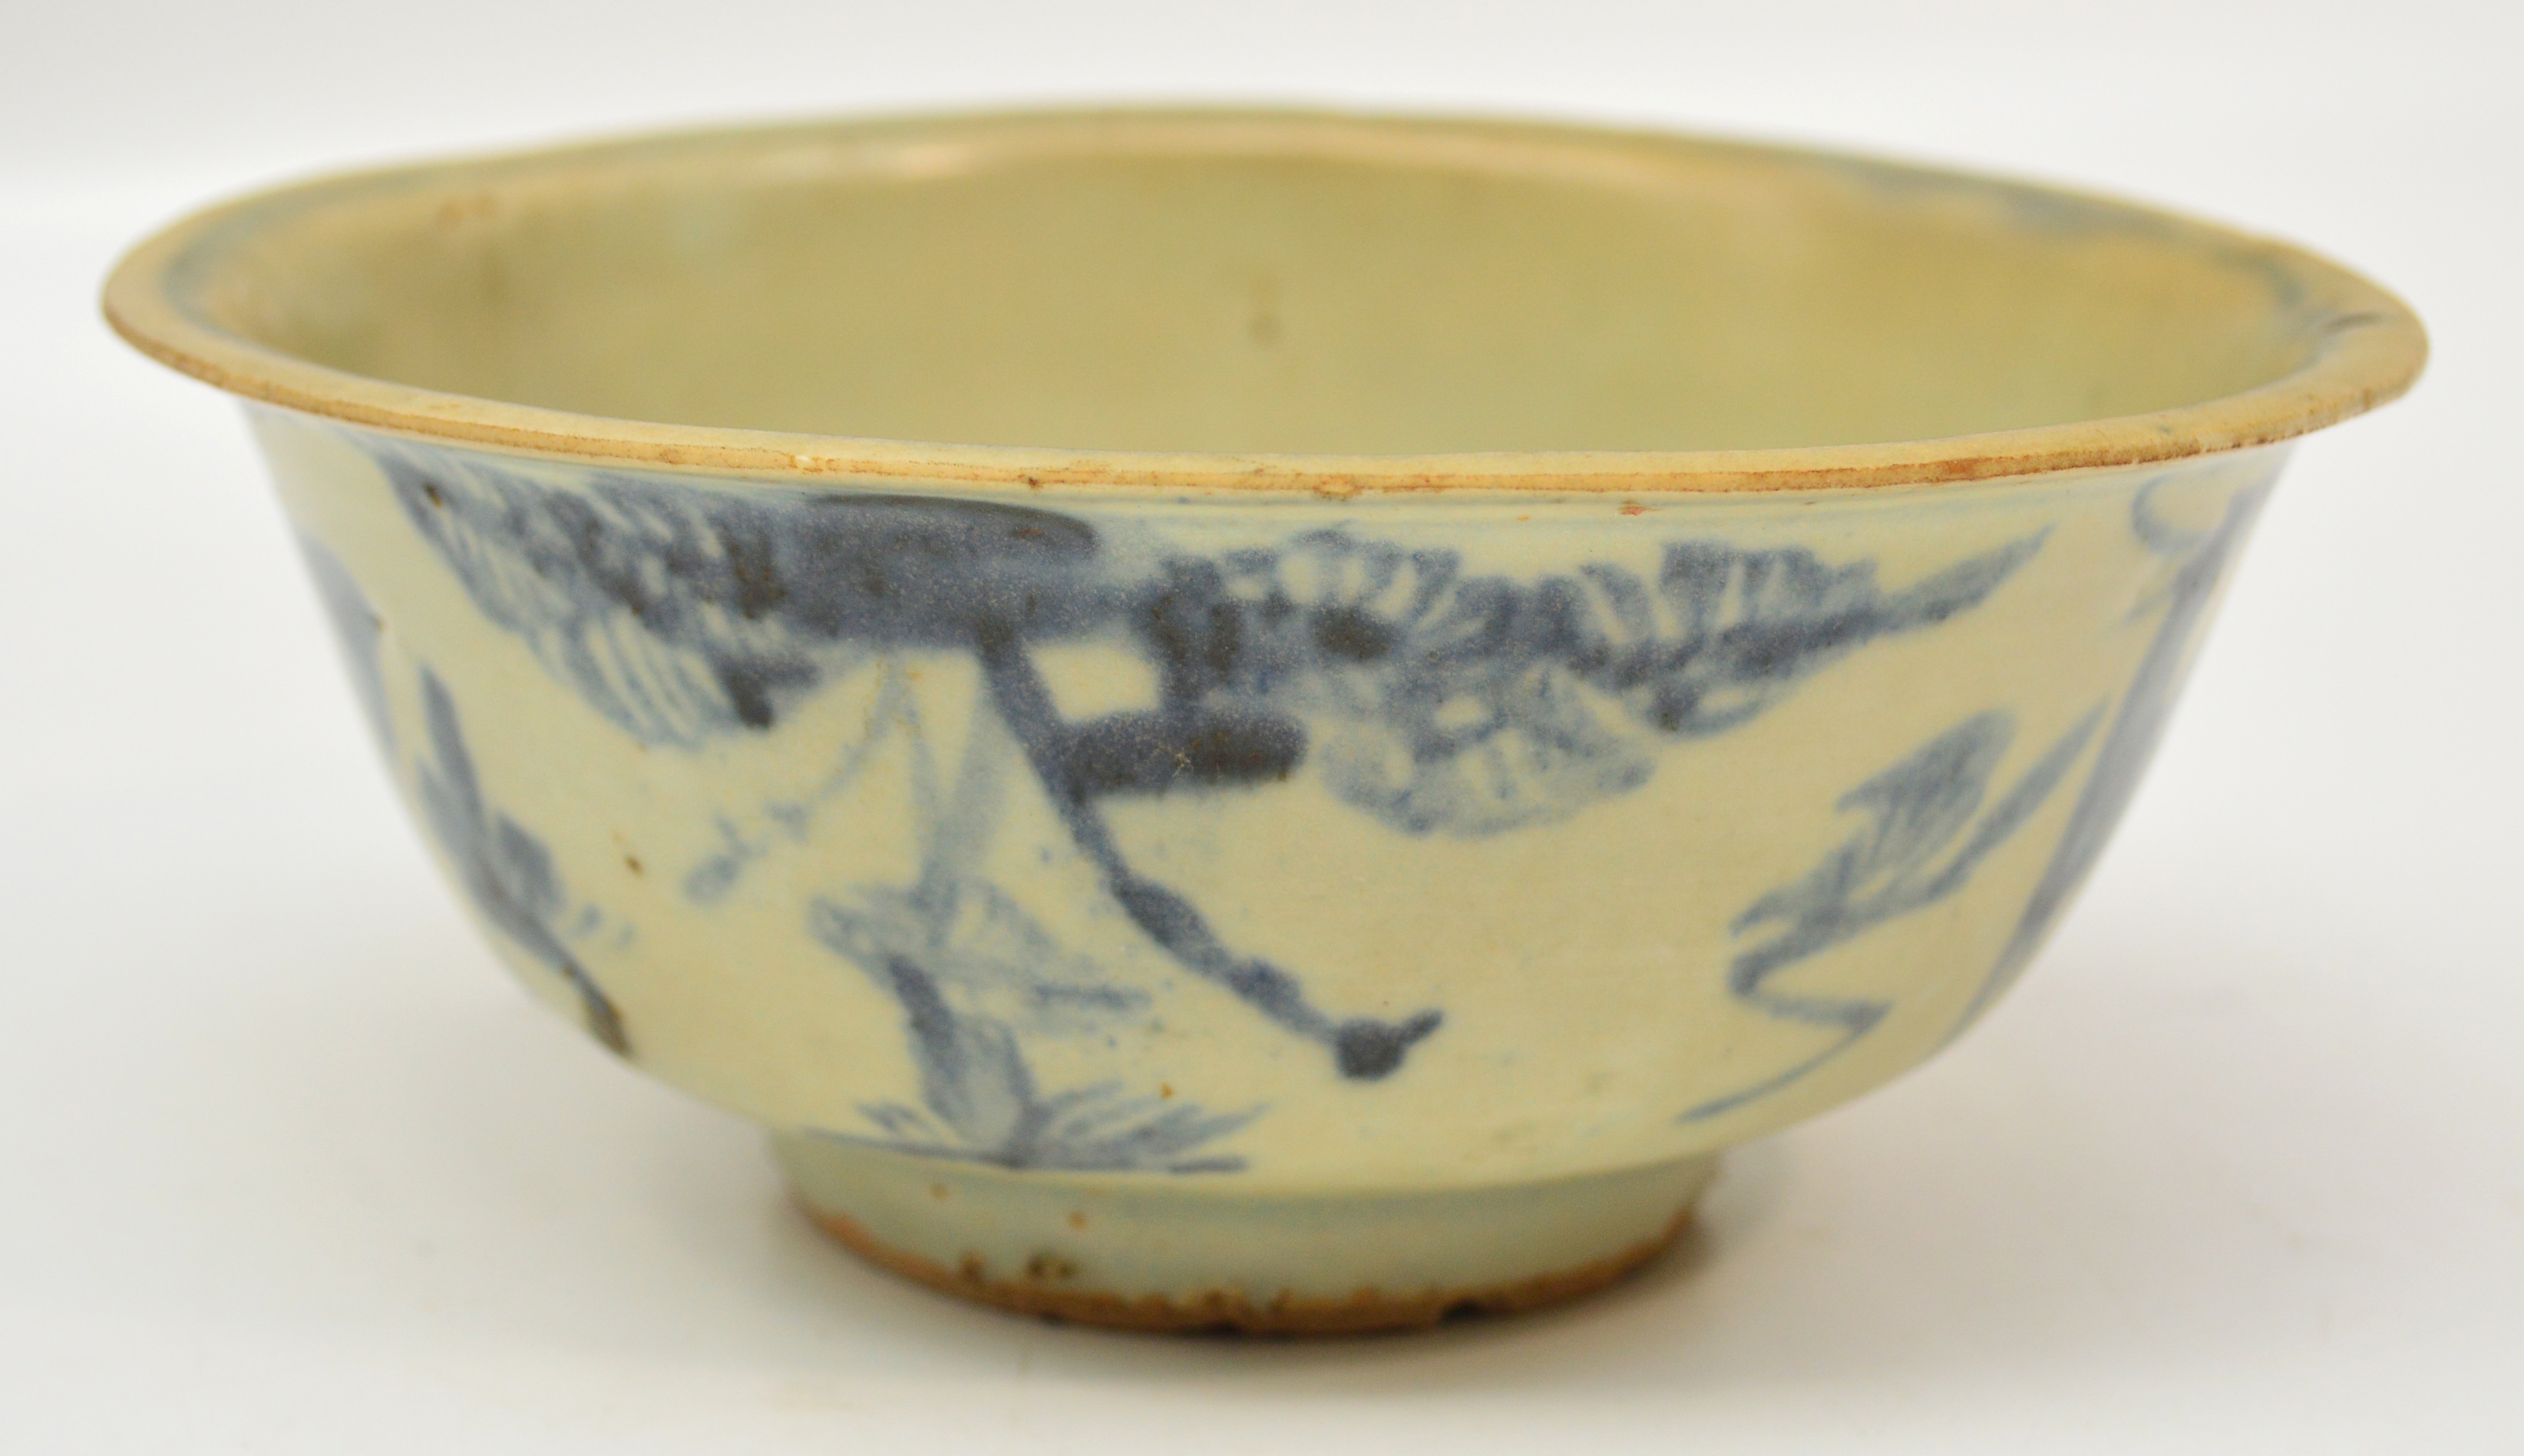 A 16th century Chinese porcelain bowl painted in underglaze blue with deer and floral sprays,